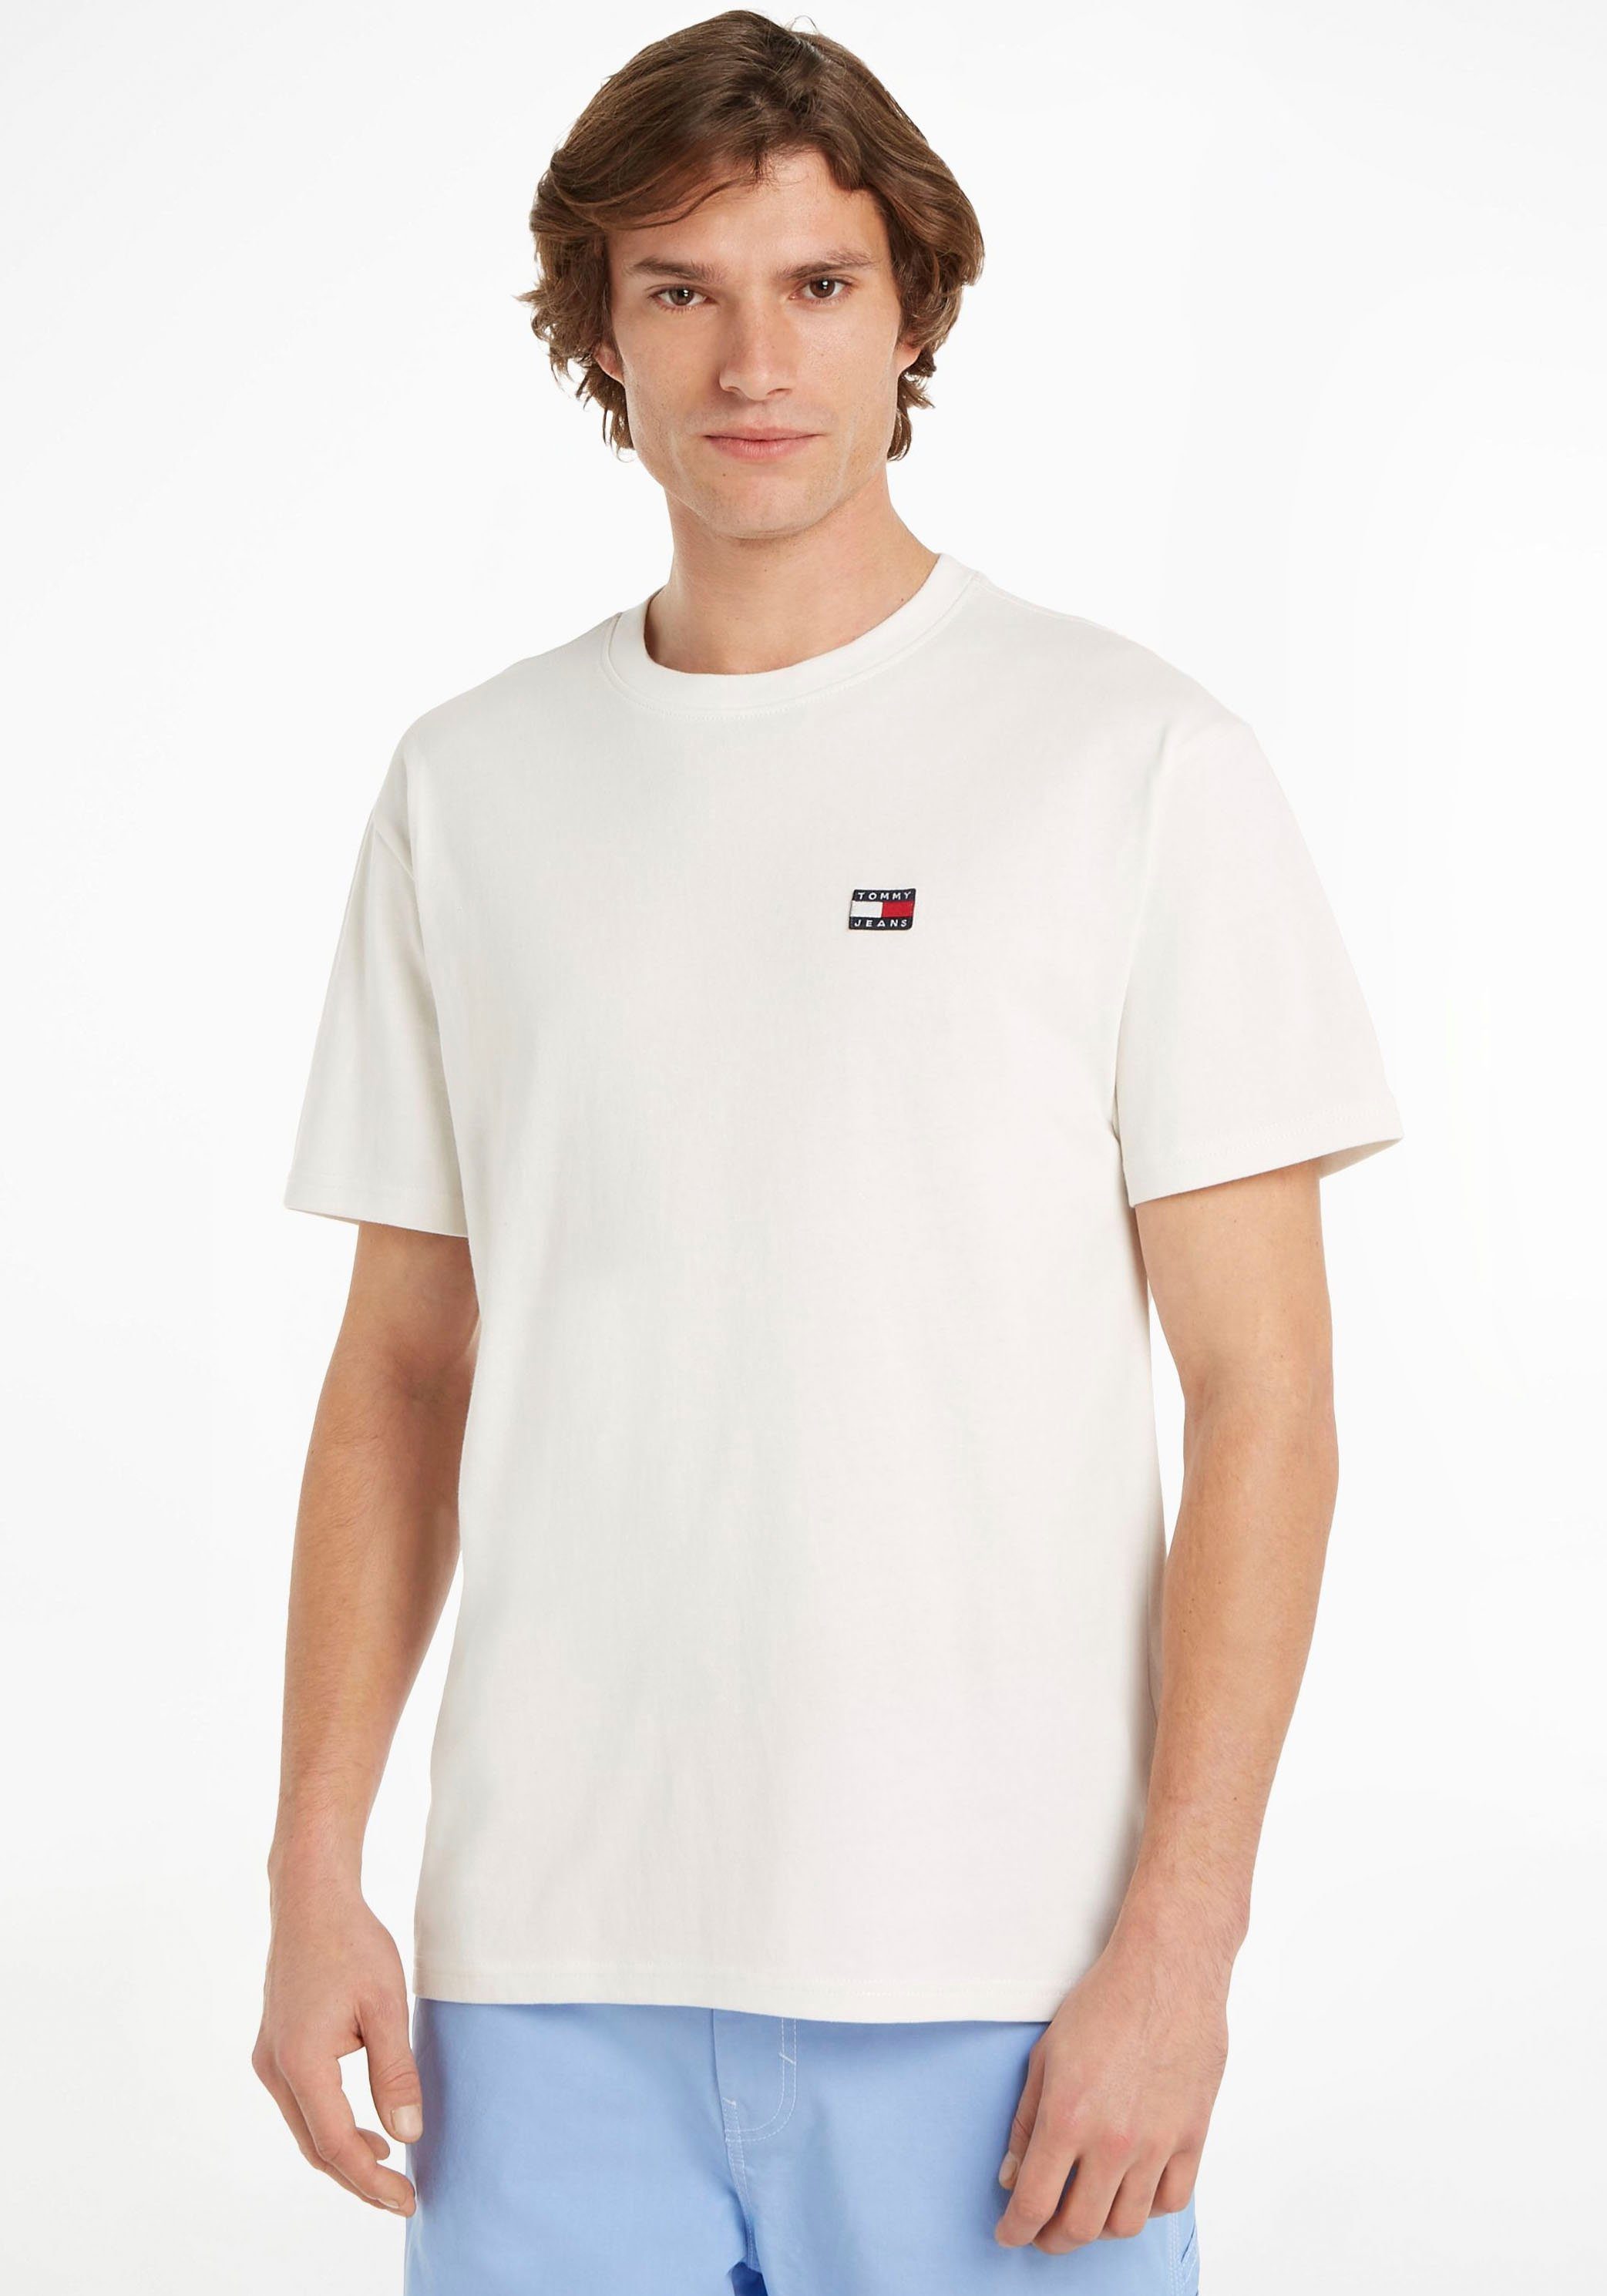 BADGE T-Shirt White TJM TEE CLSC XS mit TOMMY Rundhalsausschnitt Ancient Tommy Jeans